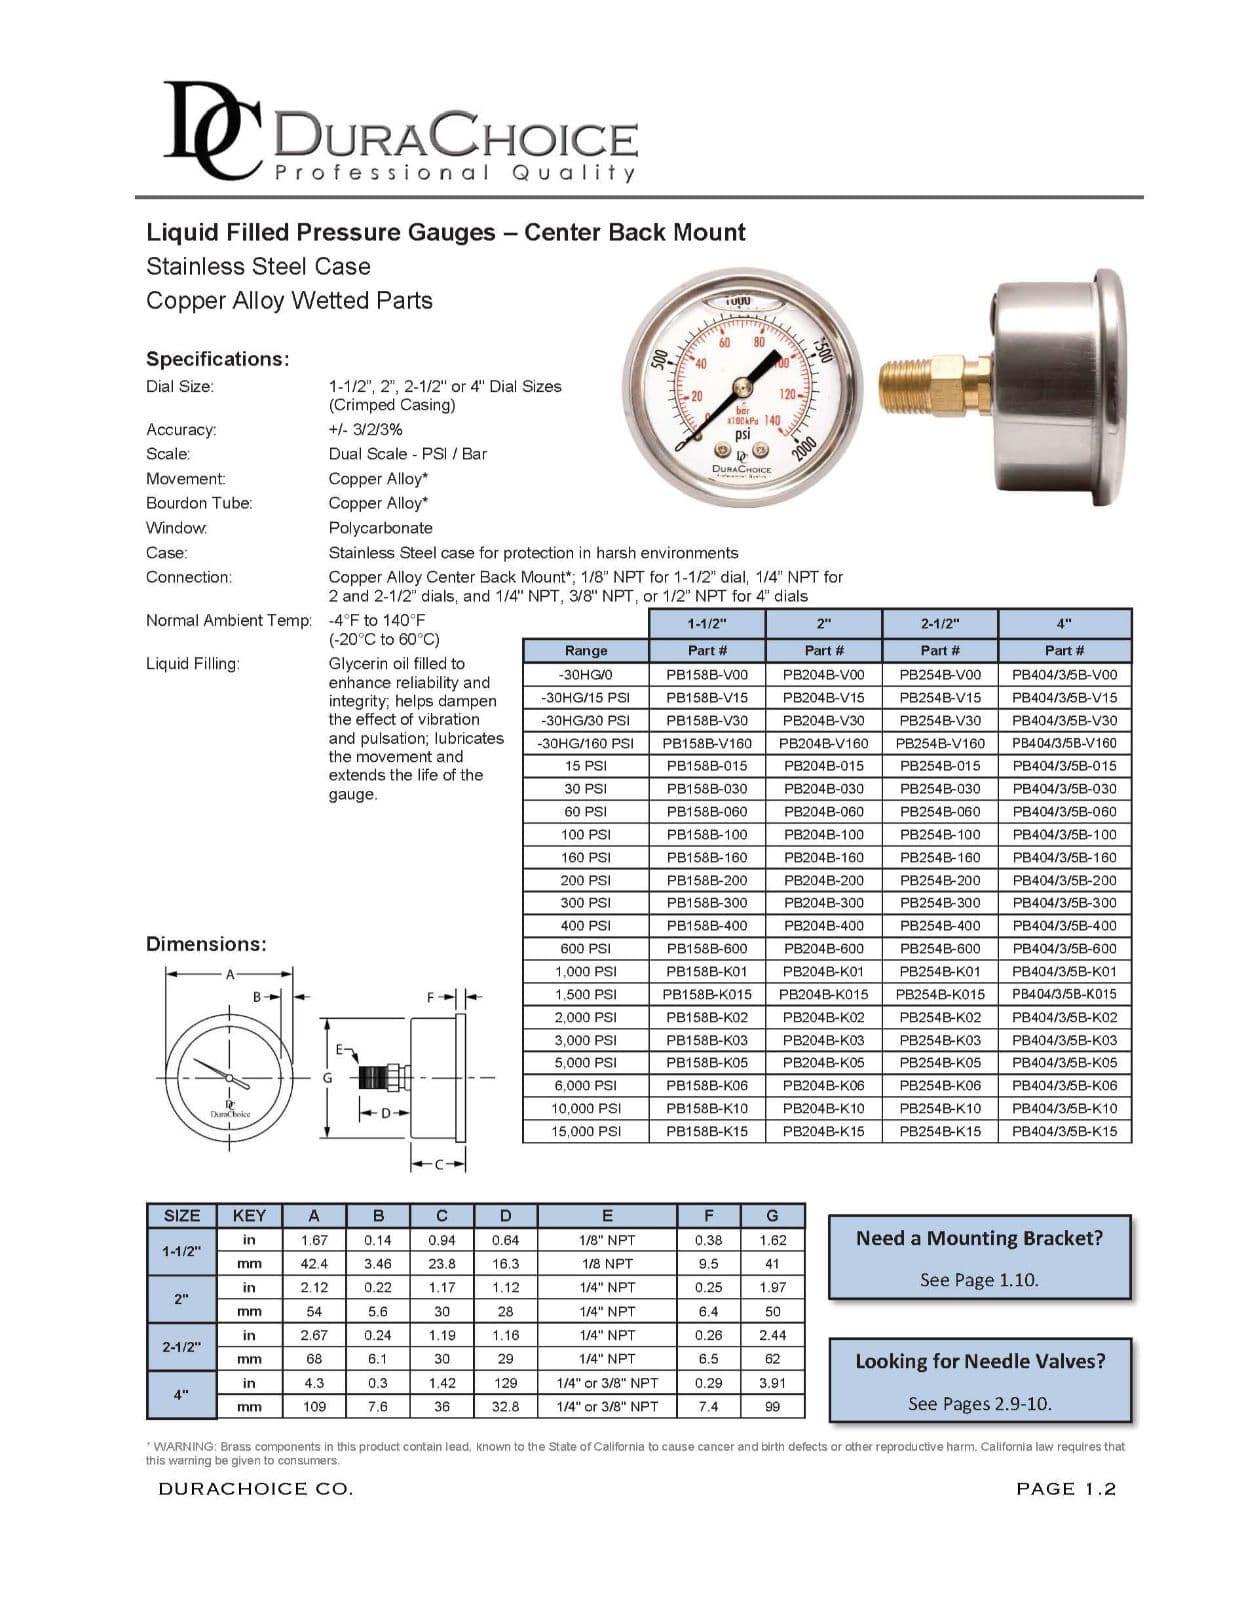 Stainless Steel Bezel 30/0 hg Vacuum psi Range Center Back Mount Dry Pressure Gauge with a Stainless Steel Case and Internals 1/4 Male NPT Connection Size and Polycarbonate Lens PIC Gauge 302D-204A 2 Dial 